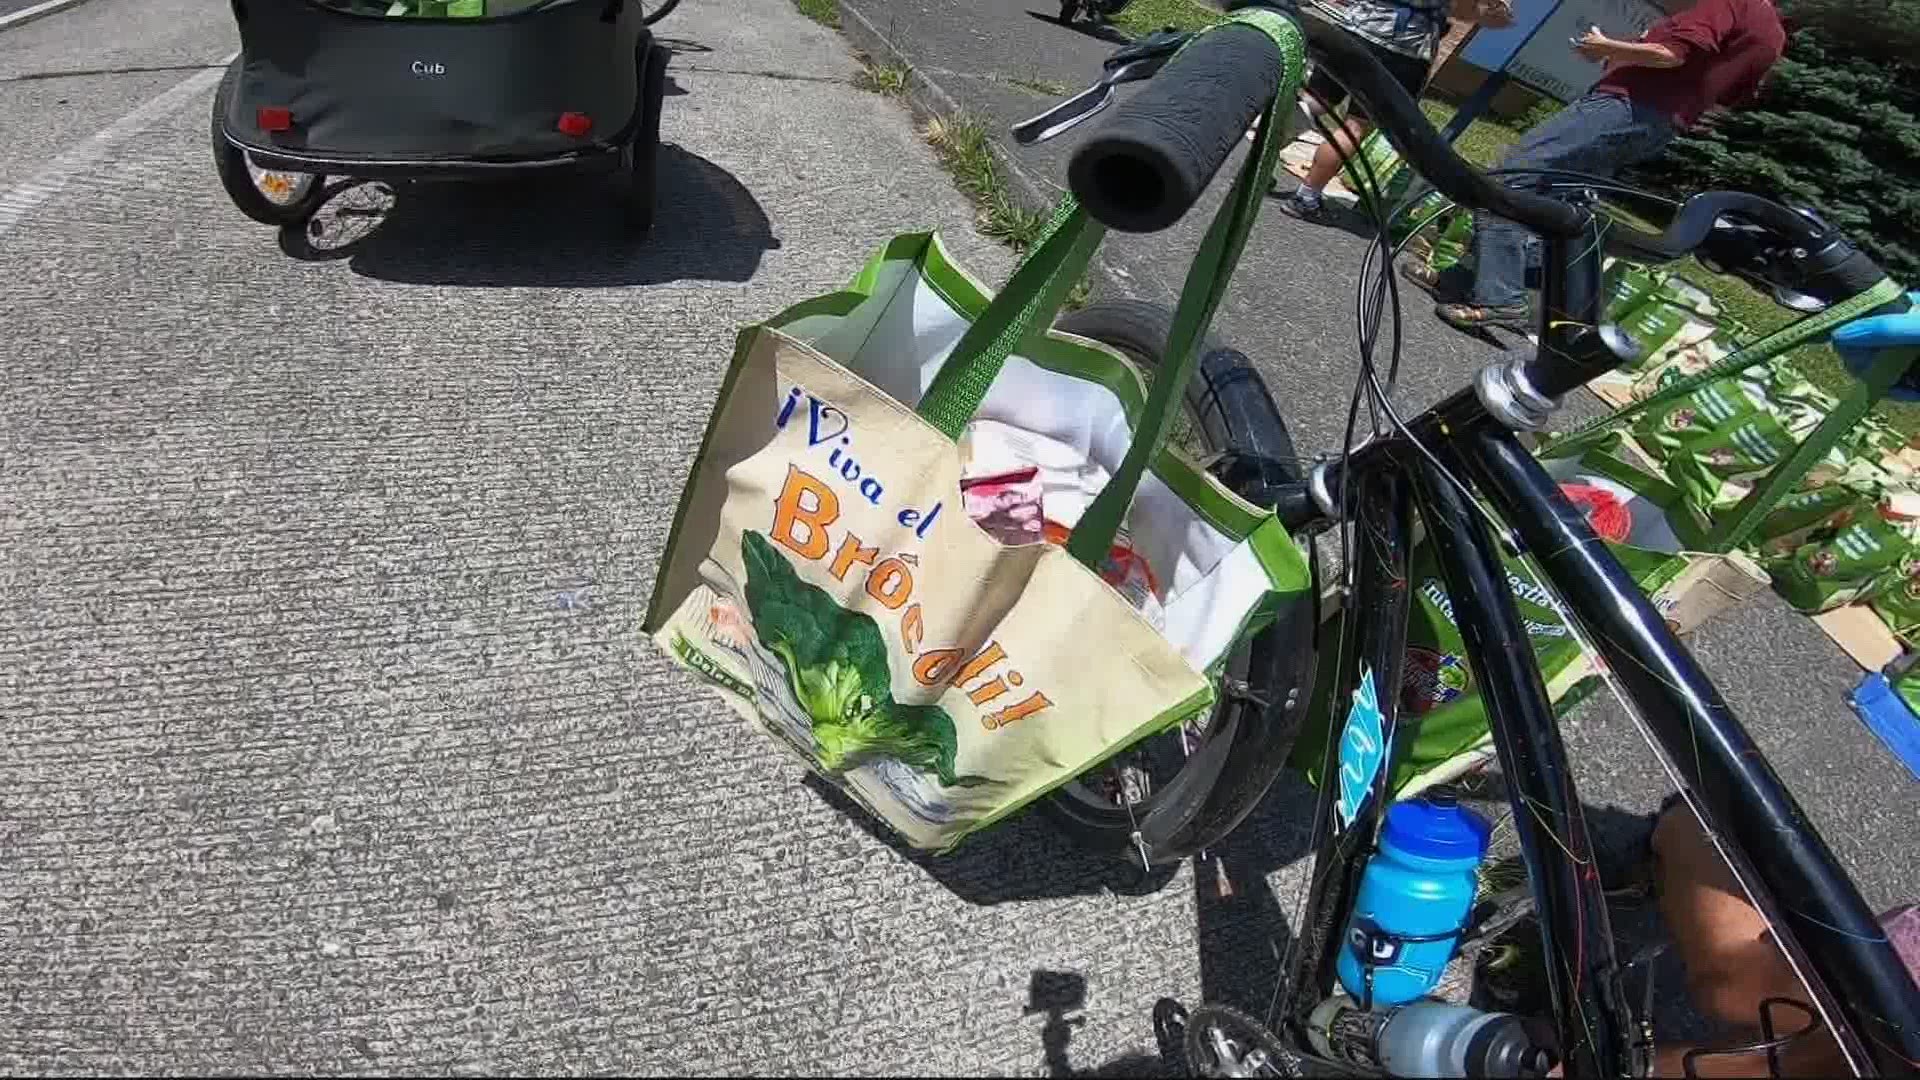 The Community Cycling Center and its partners have started a program in Portland to deliver food by bicycle to people in need. Steve Redlin has more.